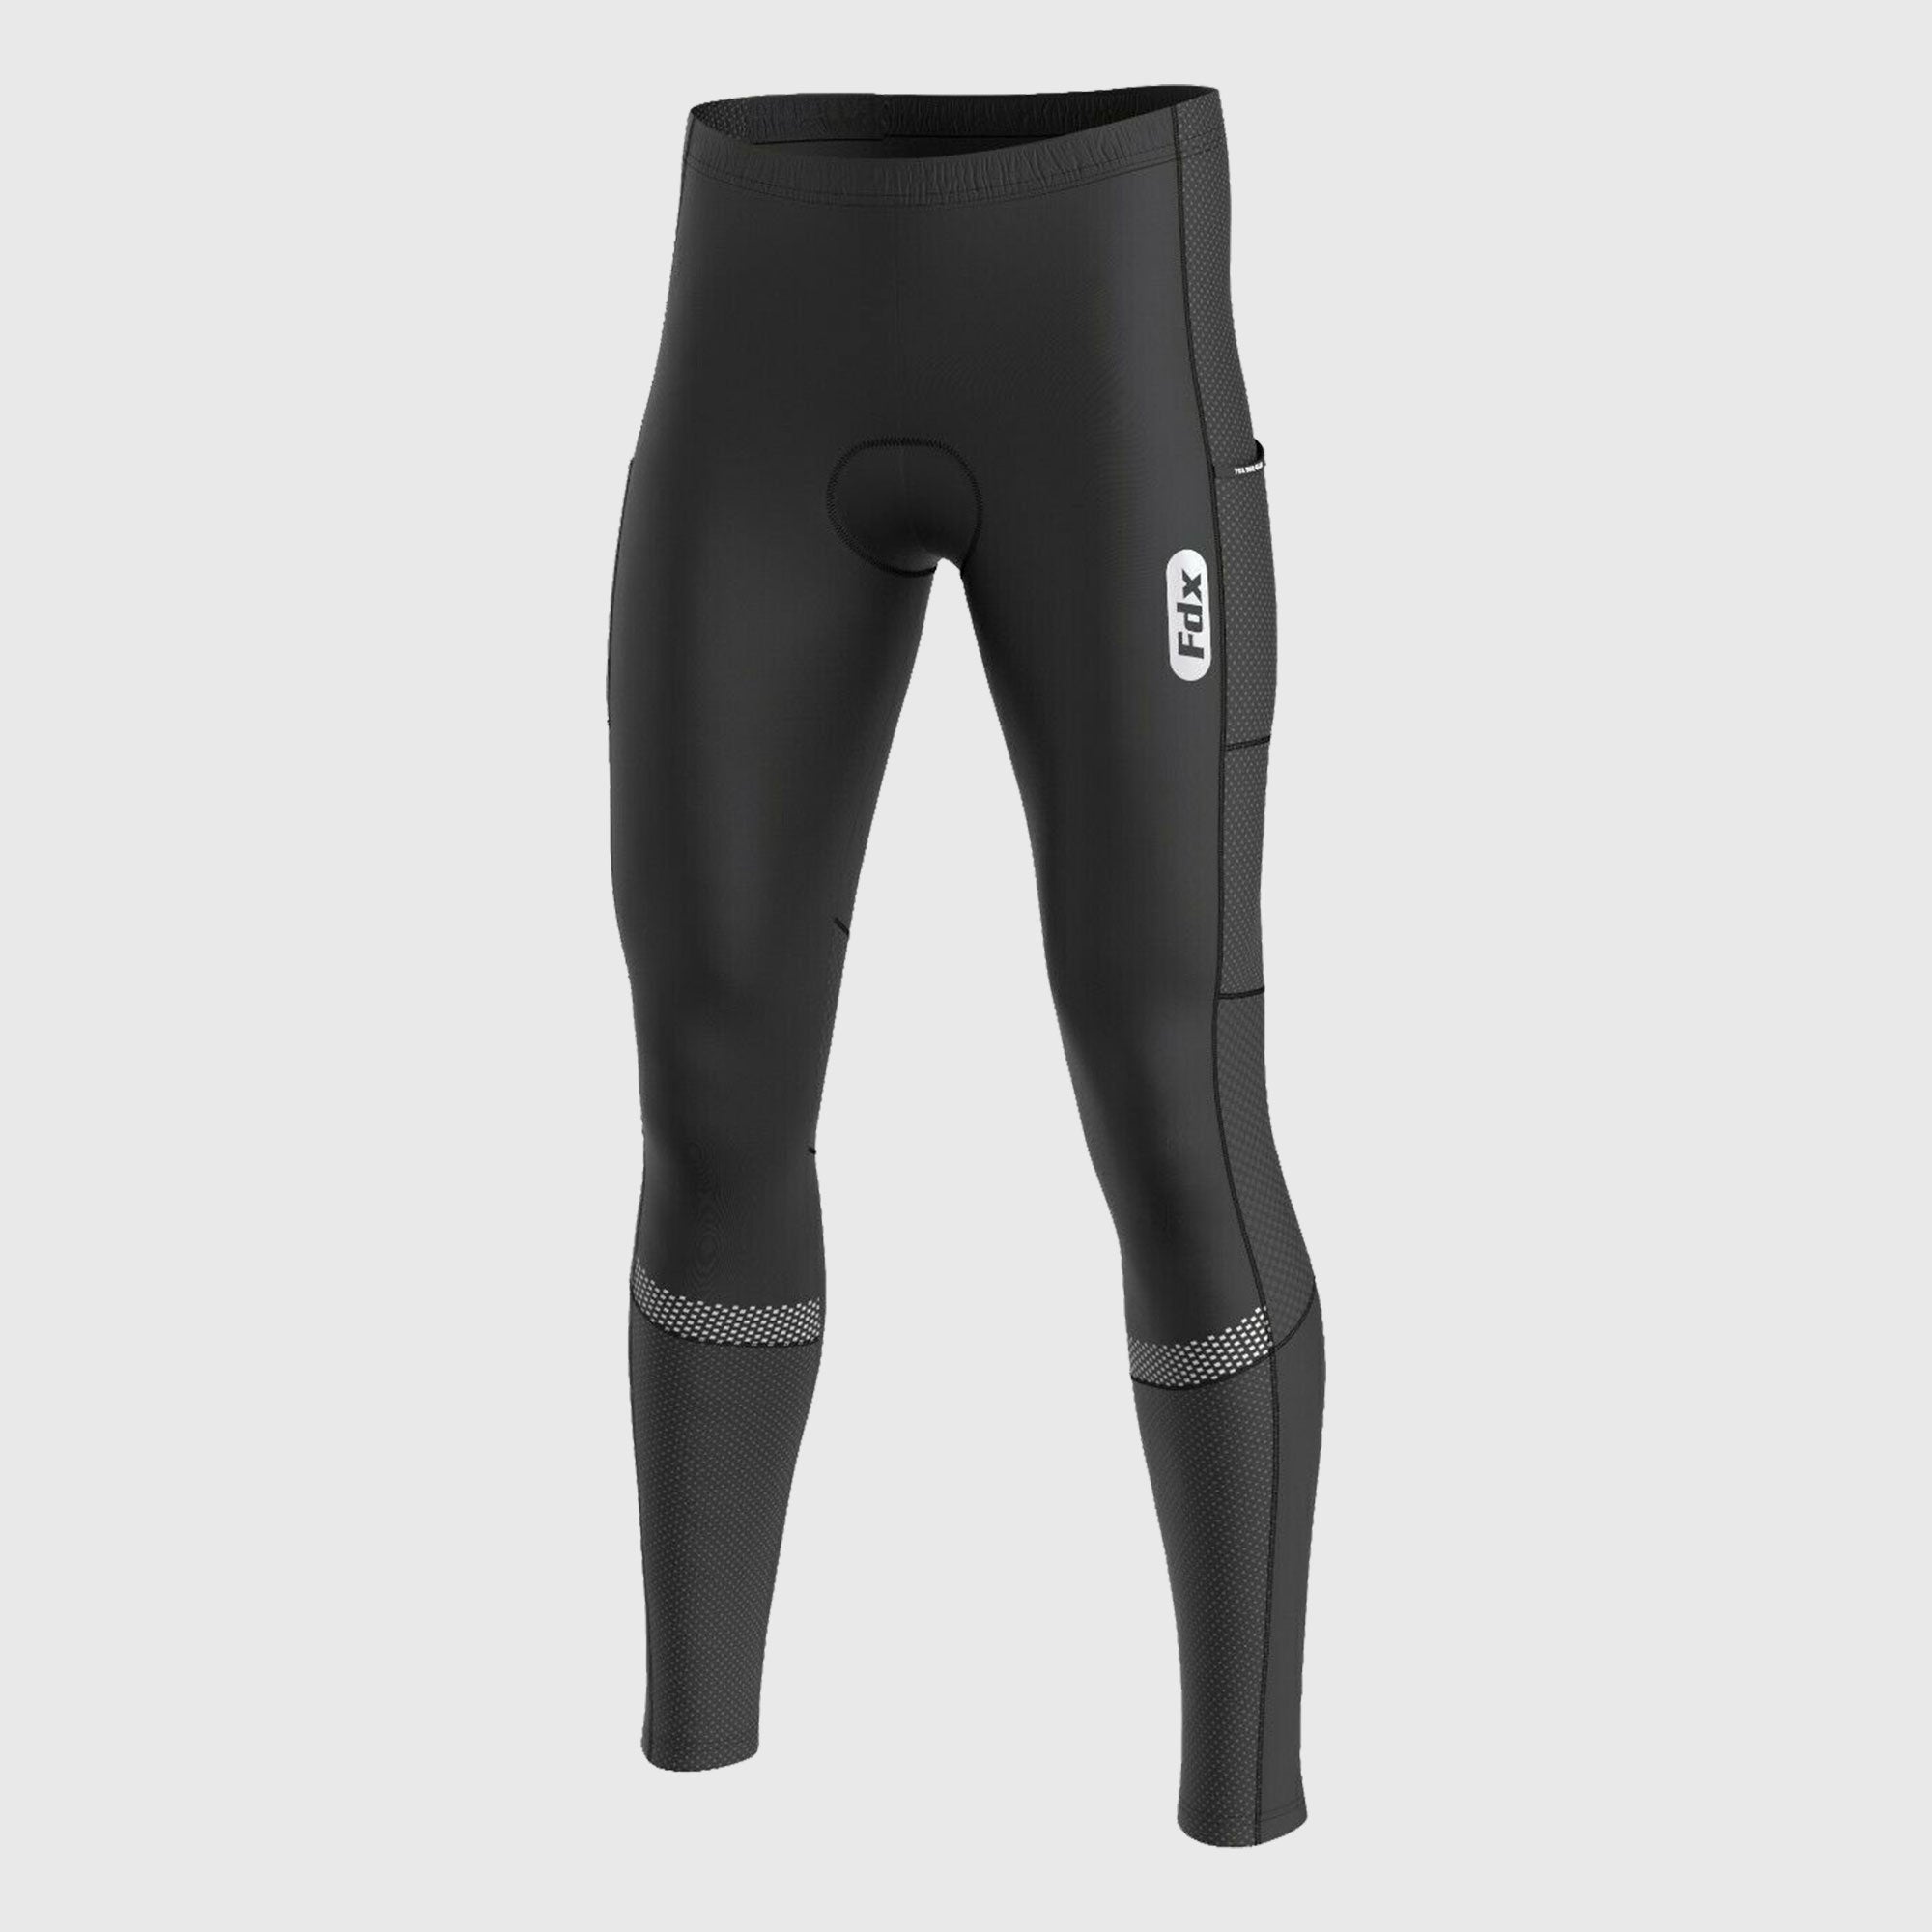 Fdx All Day Men's Black Thermal Padded Cycling Tights